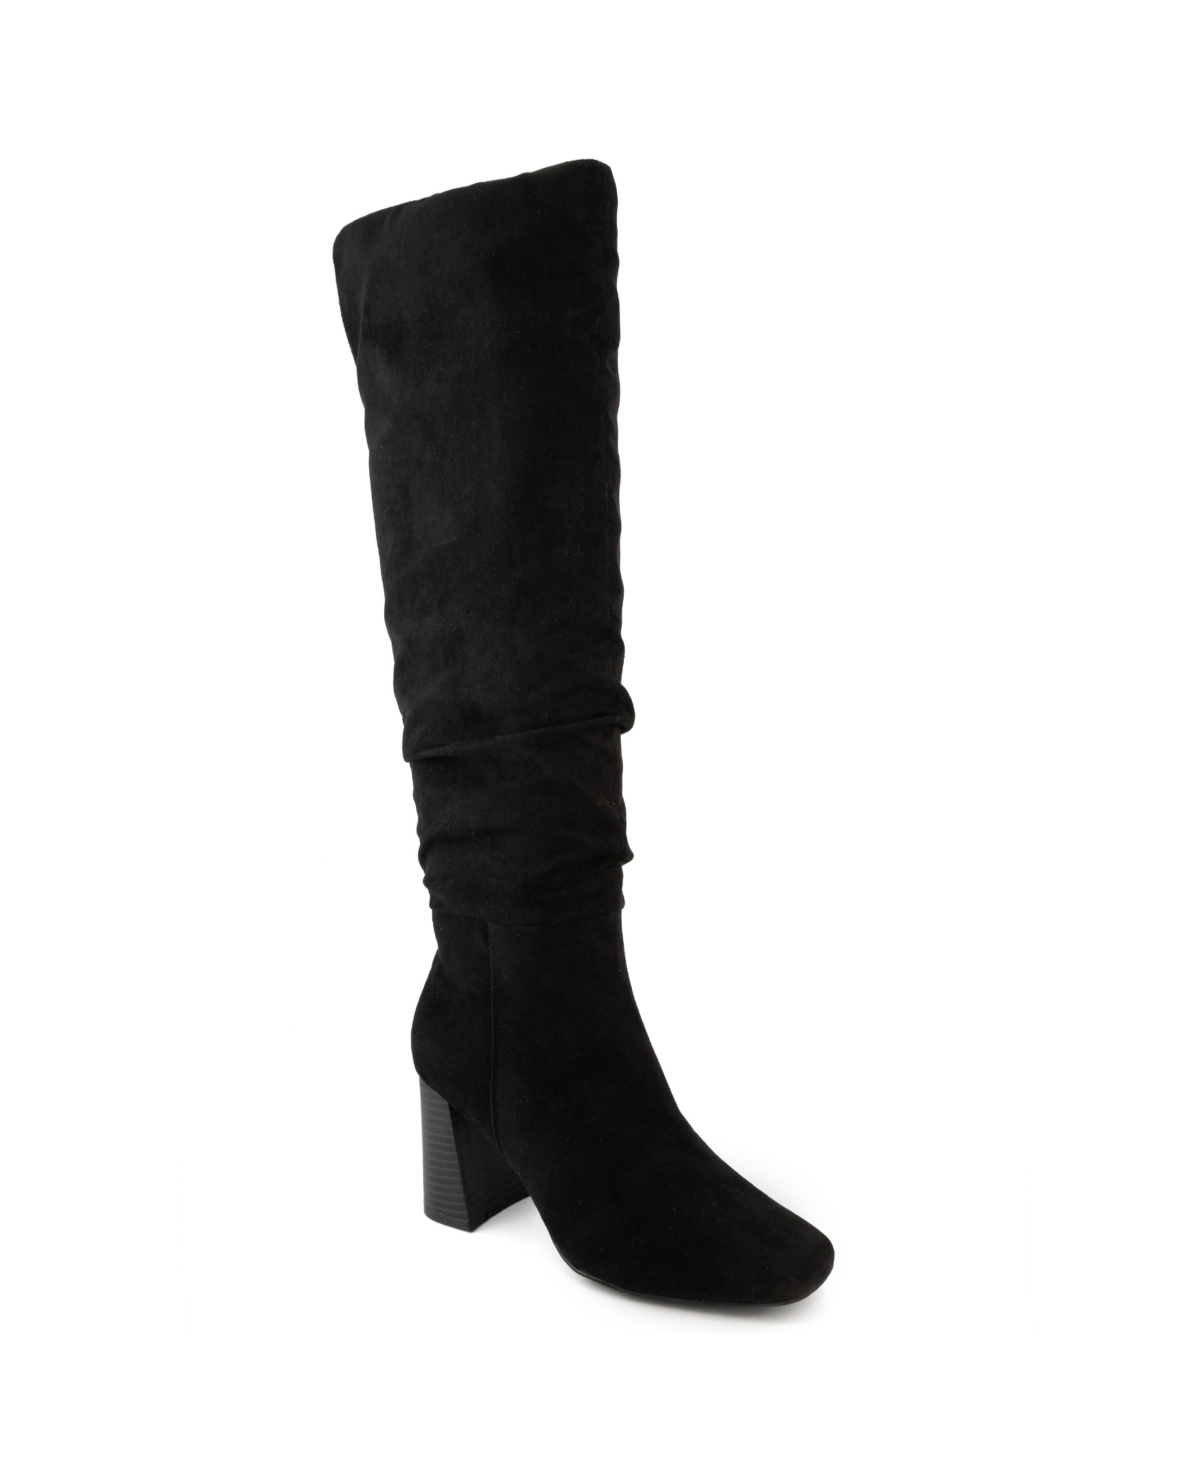 Women's Emerson Slouch Boots - Black